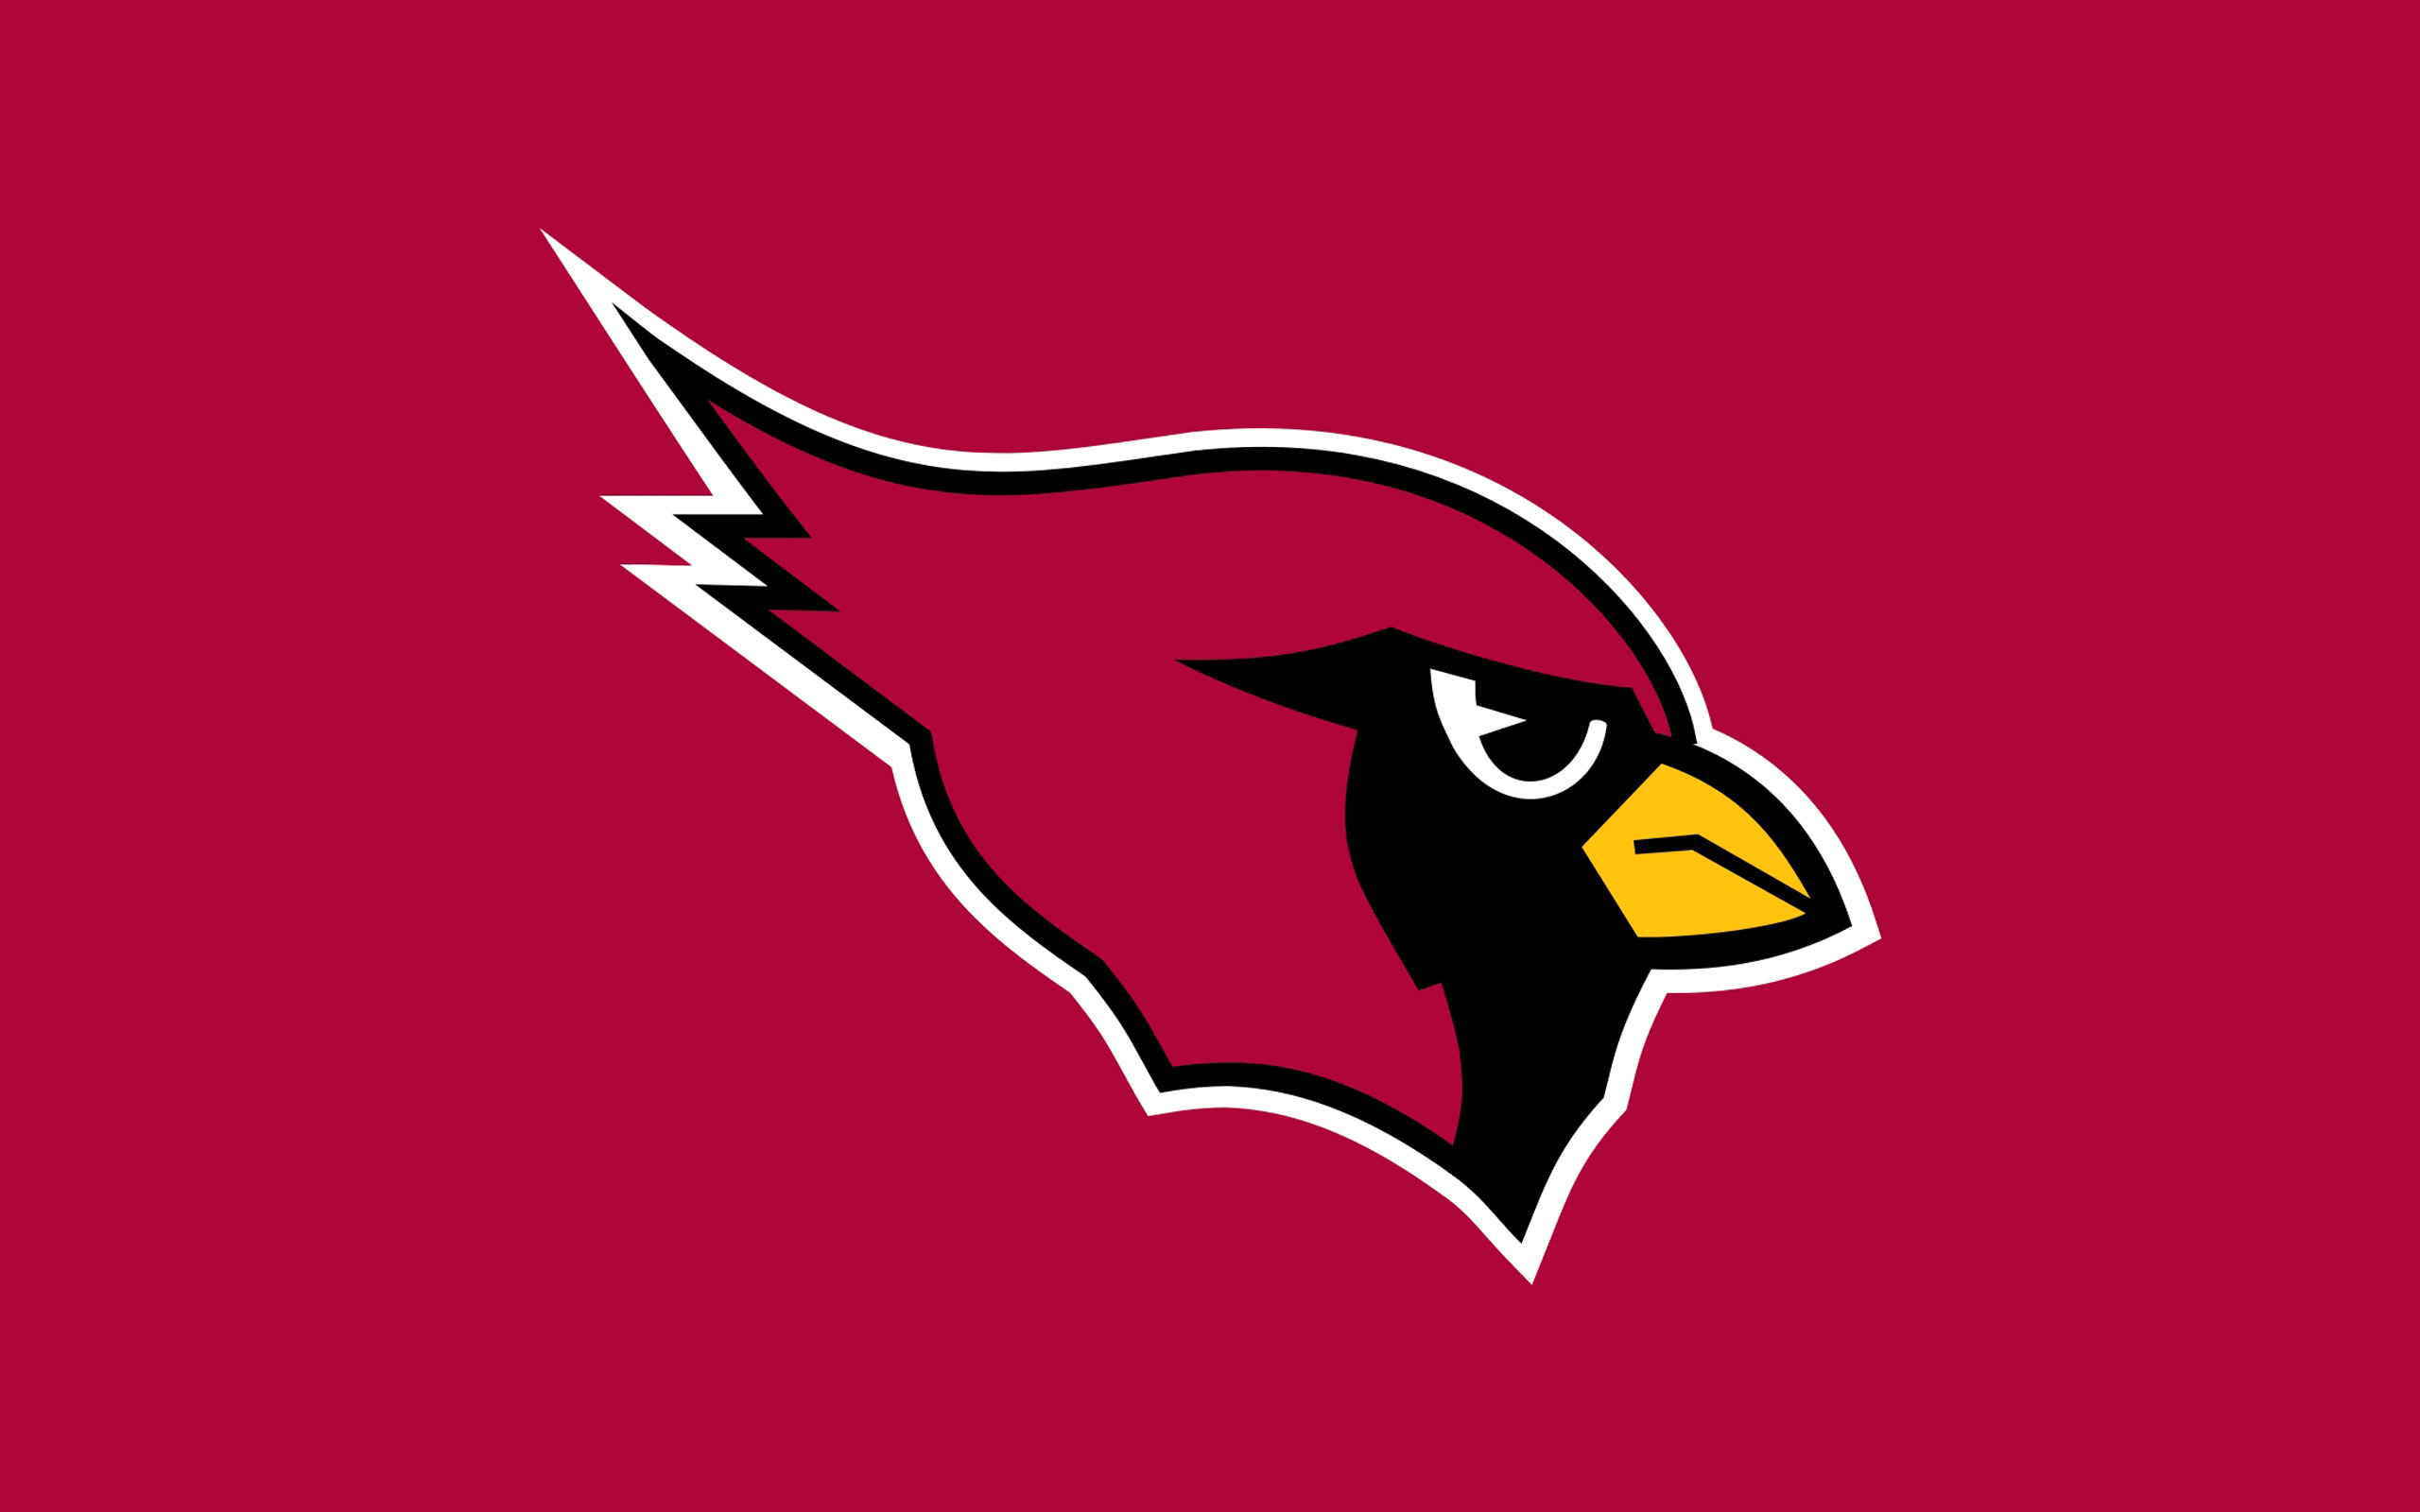 Below To Delete This Arizona Cardinals2 Photo Image From